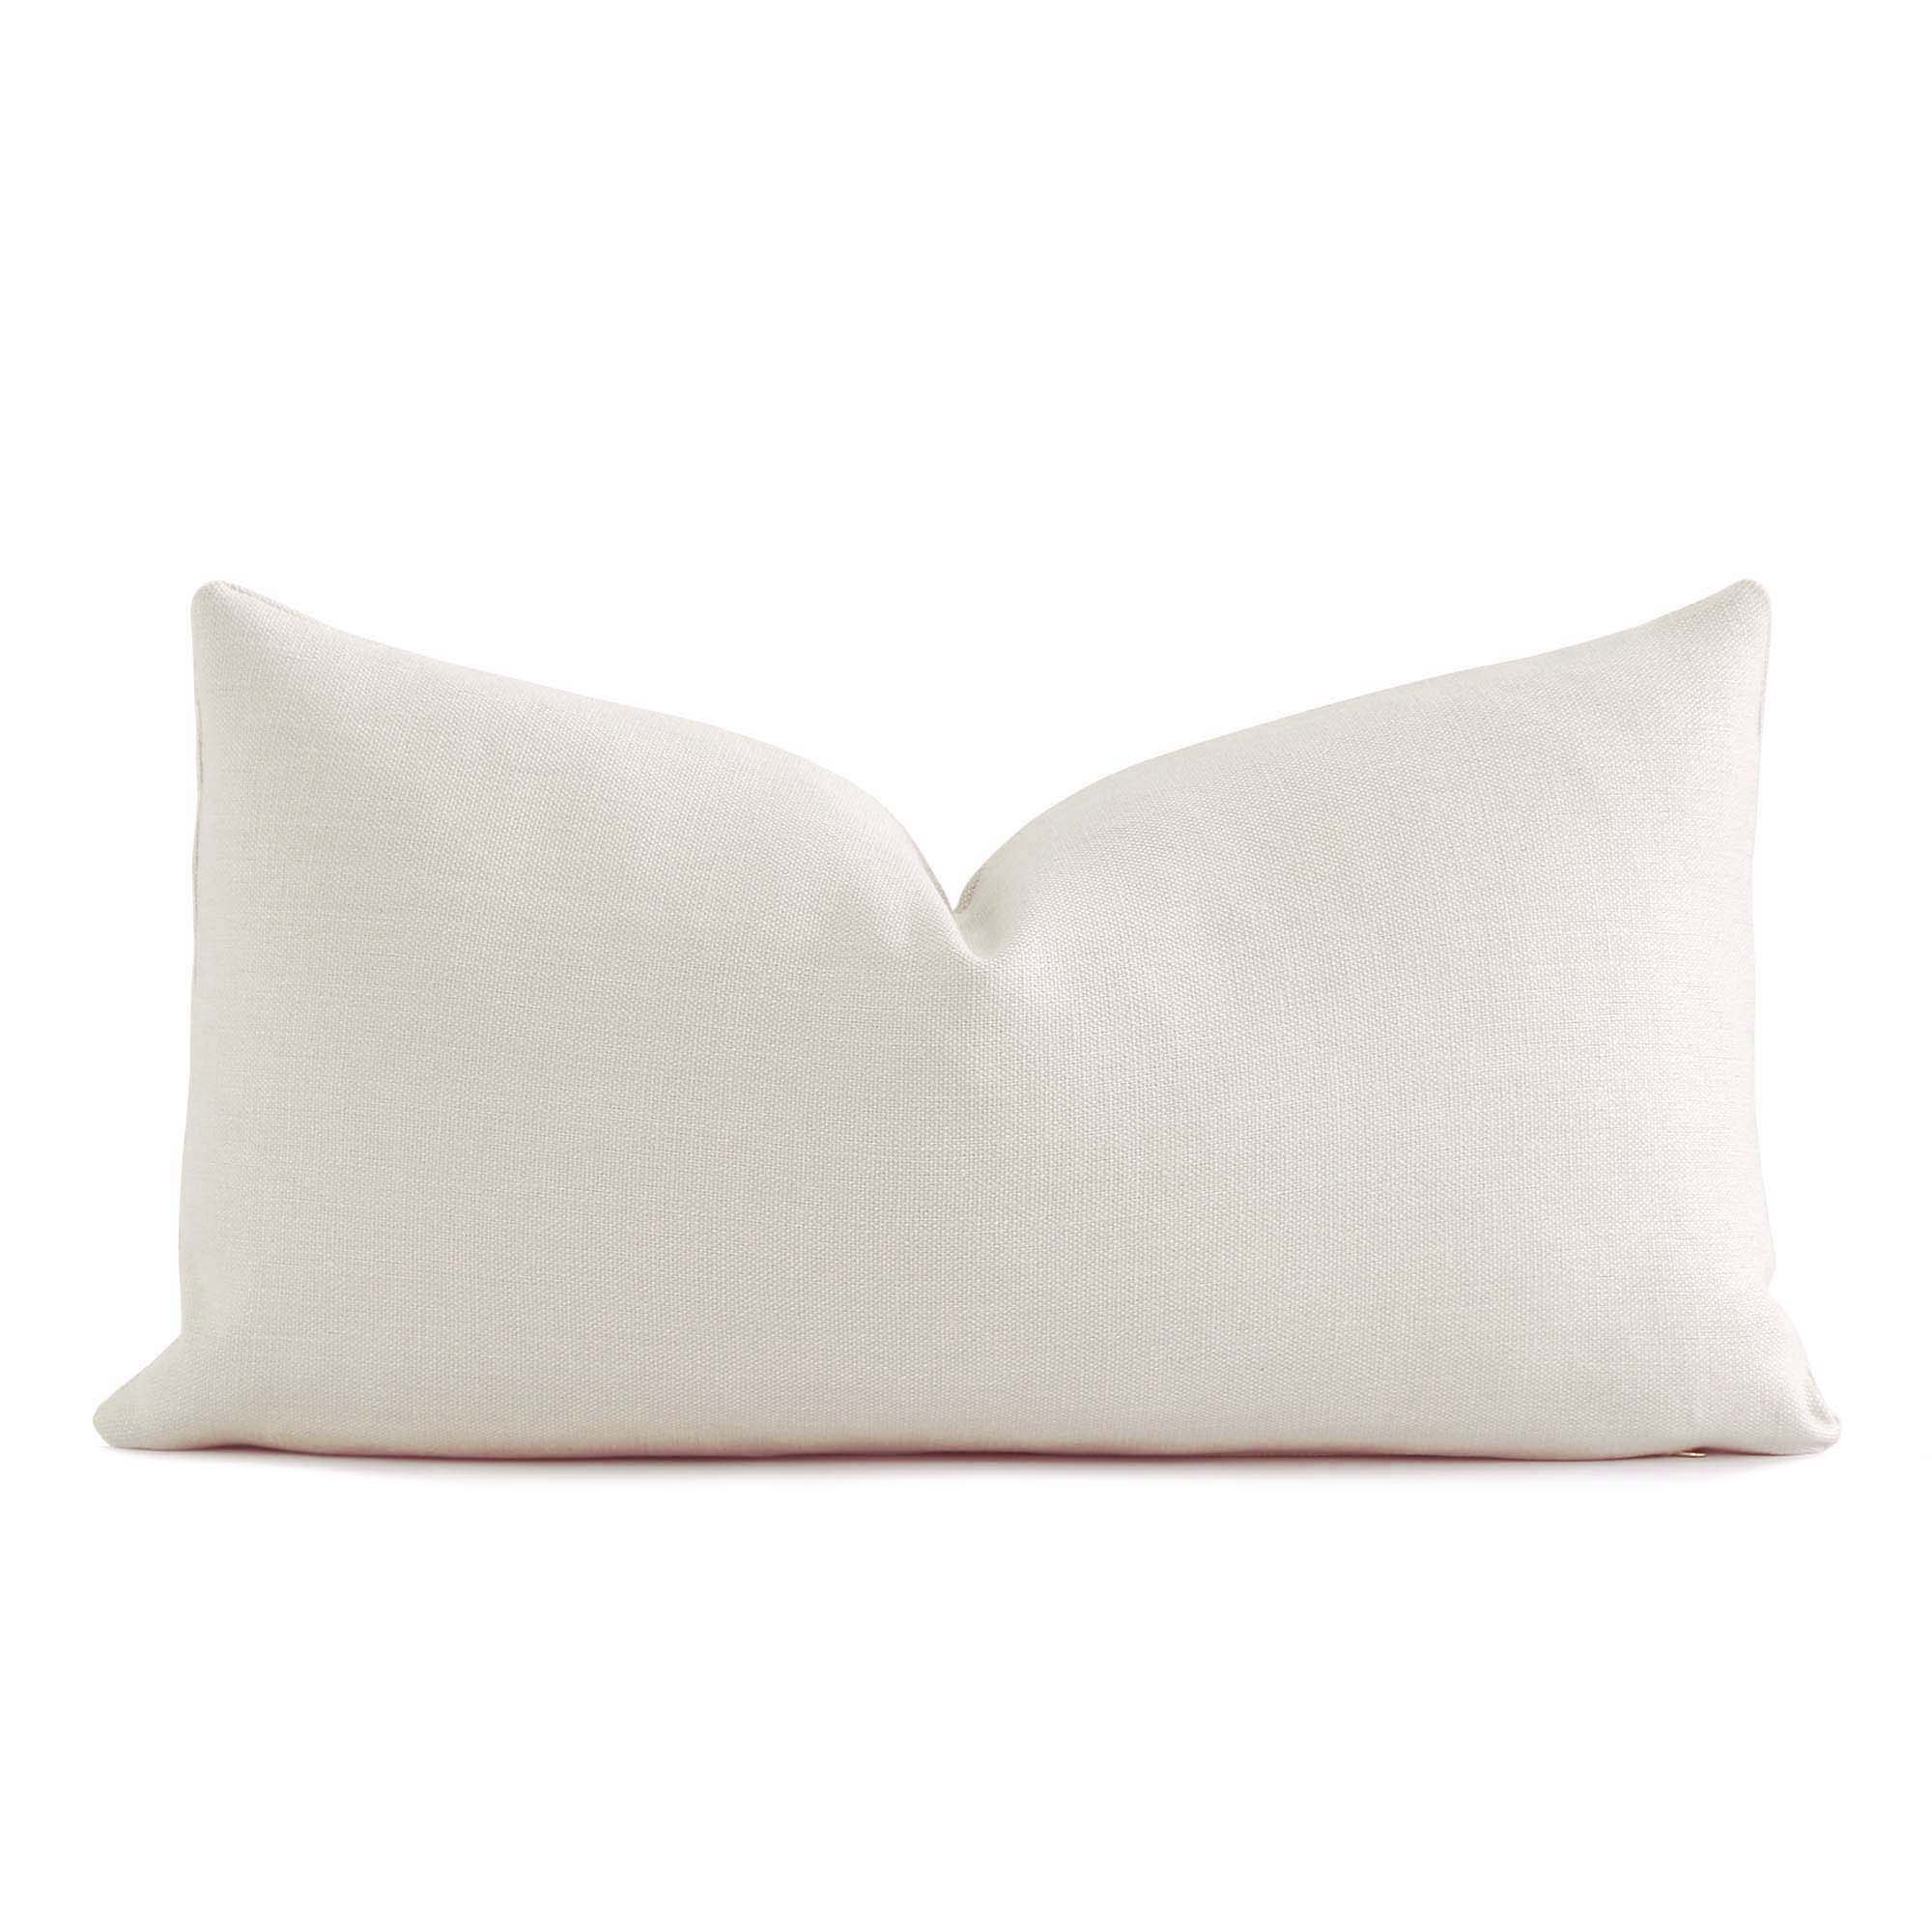 Tay Solid Ivory White Linen Throw Pillow for Modern Farmhouse